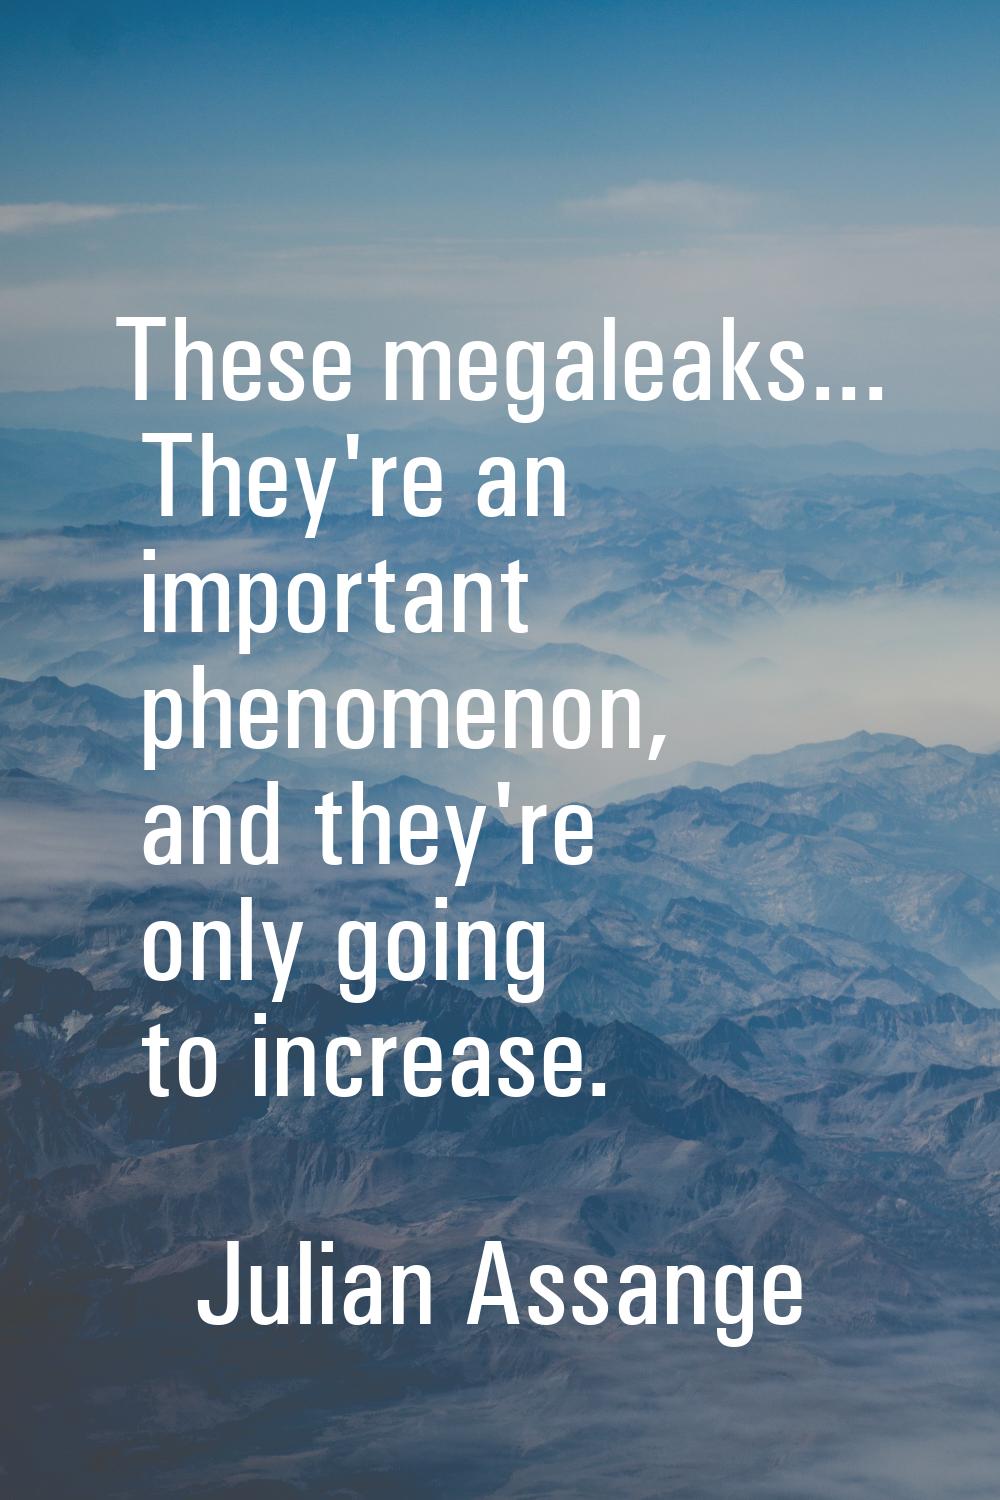 These megaleaks... They're an important phenomenon, and they're only going to increase.